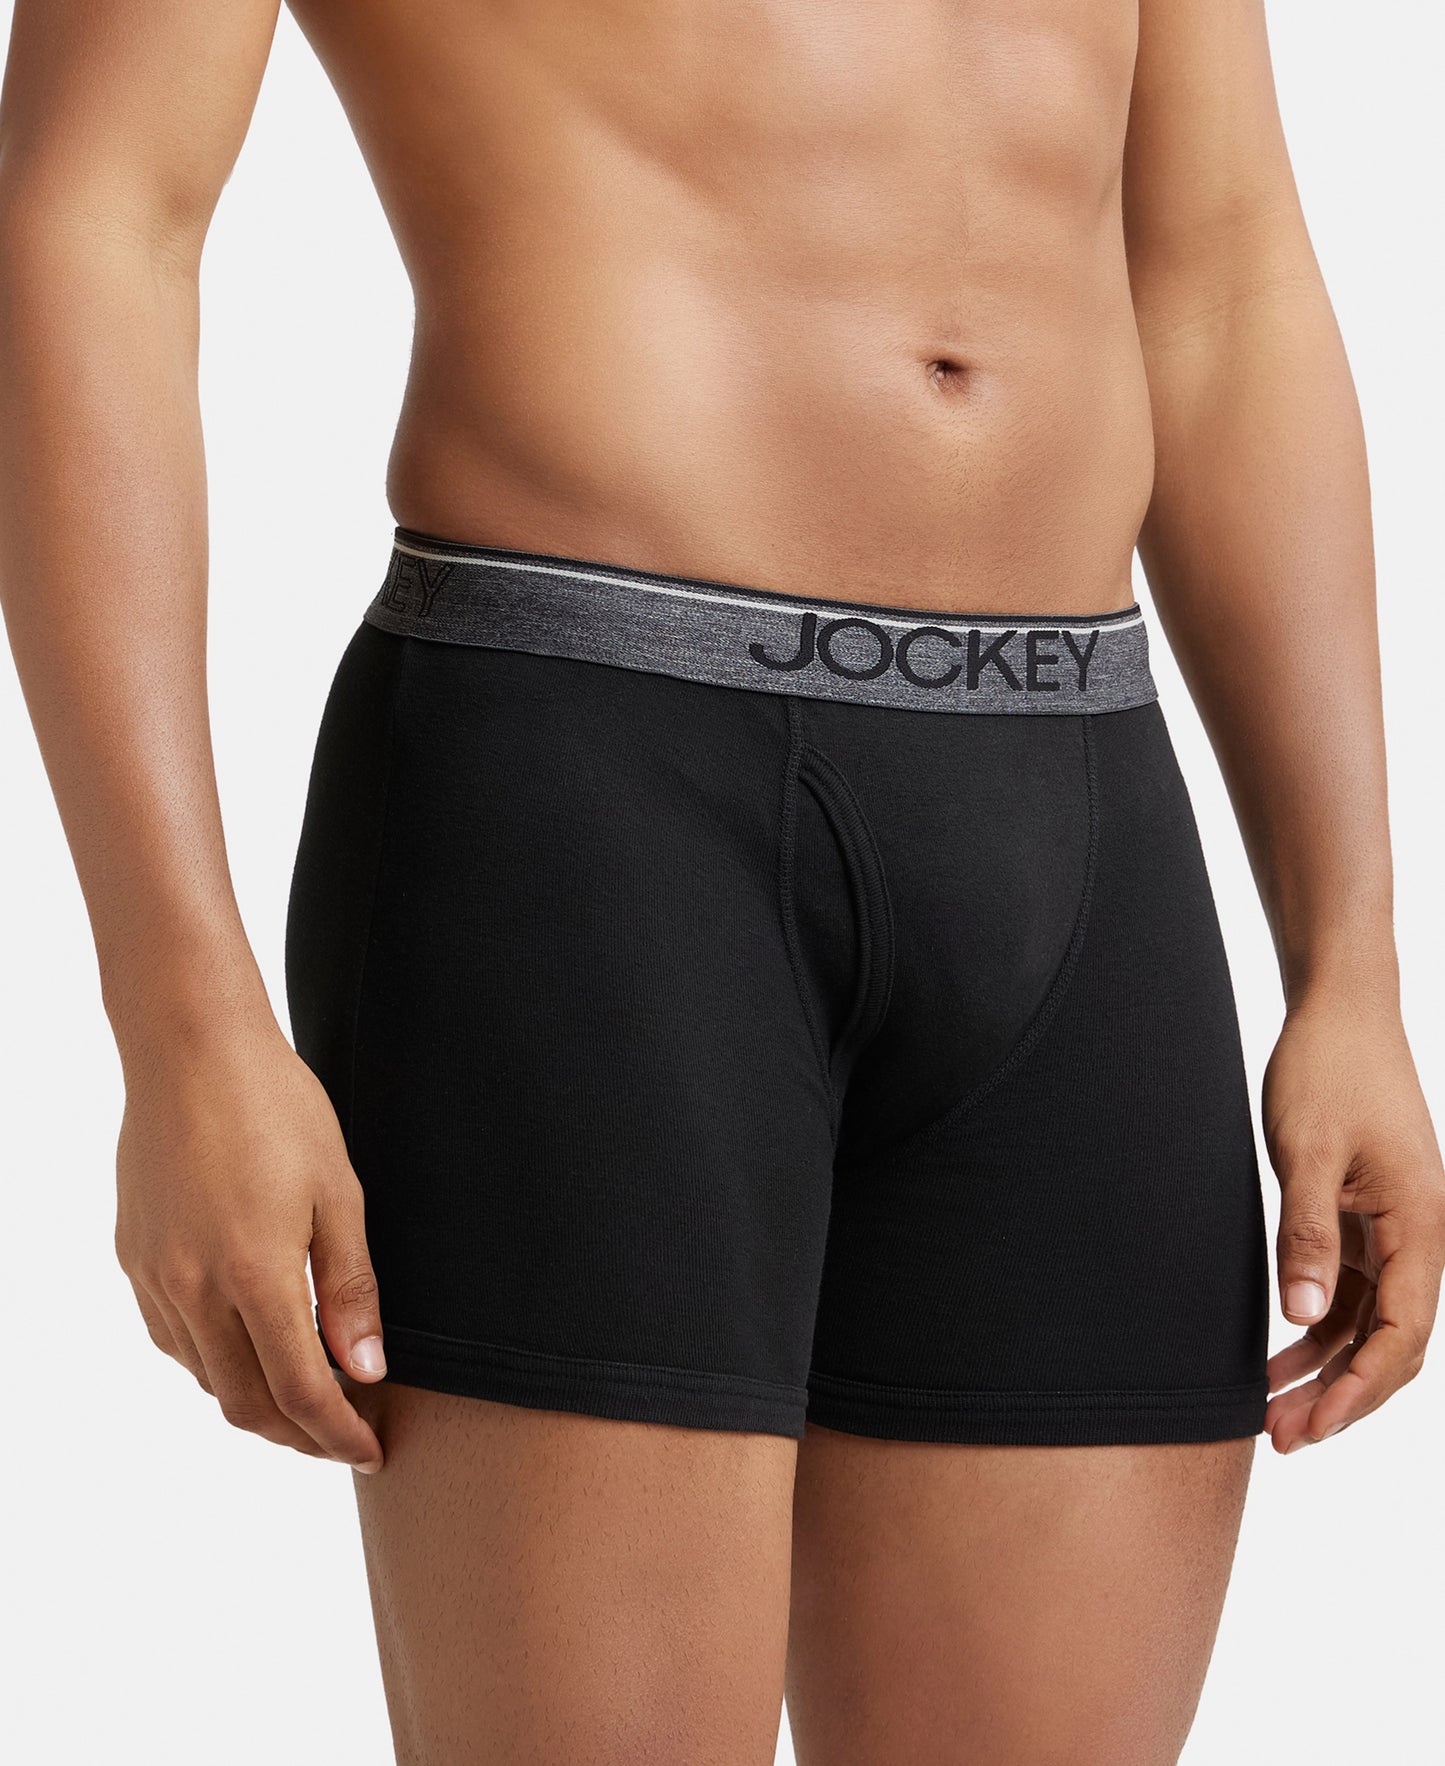 Super Combed Cotton Rib Solid Boxer Brief with Ultrasoft and Durable Waistband - Black/Navy/Charcoal Melange (Pack of 3)